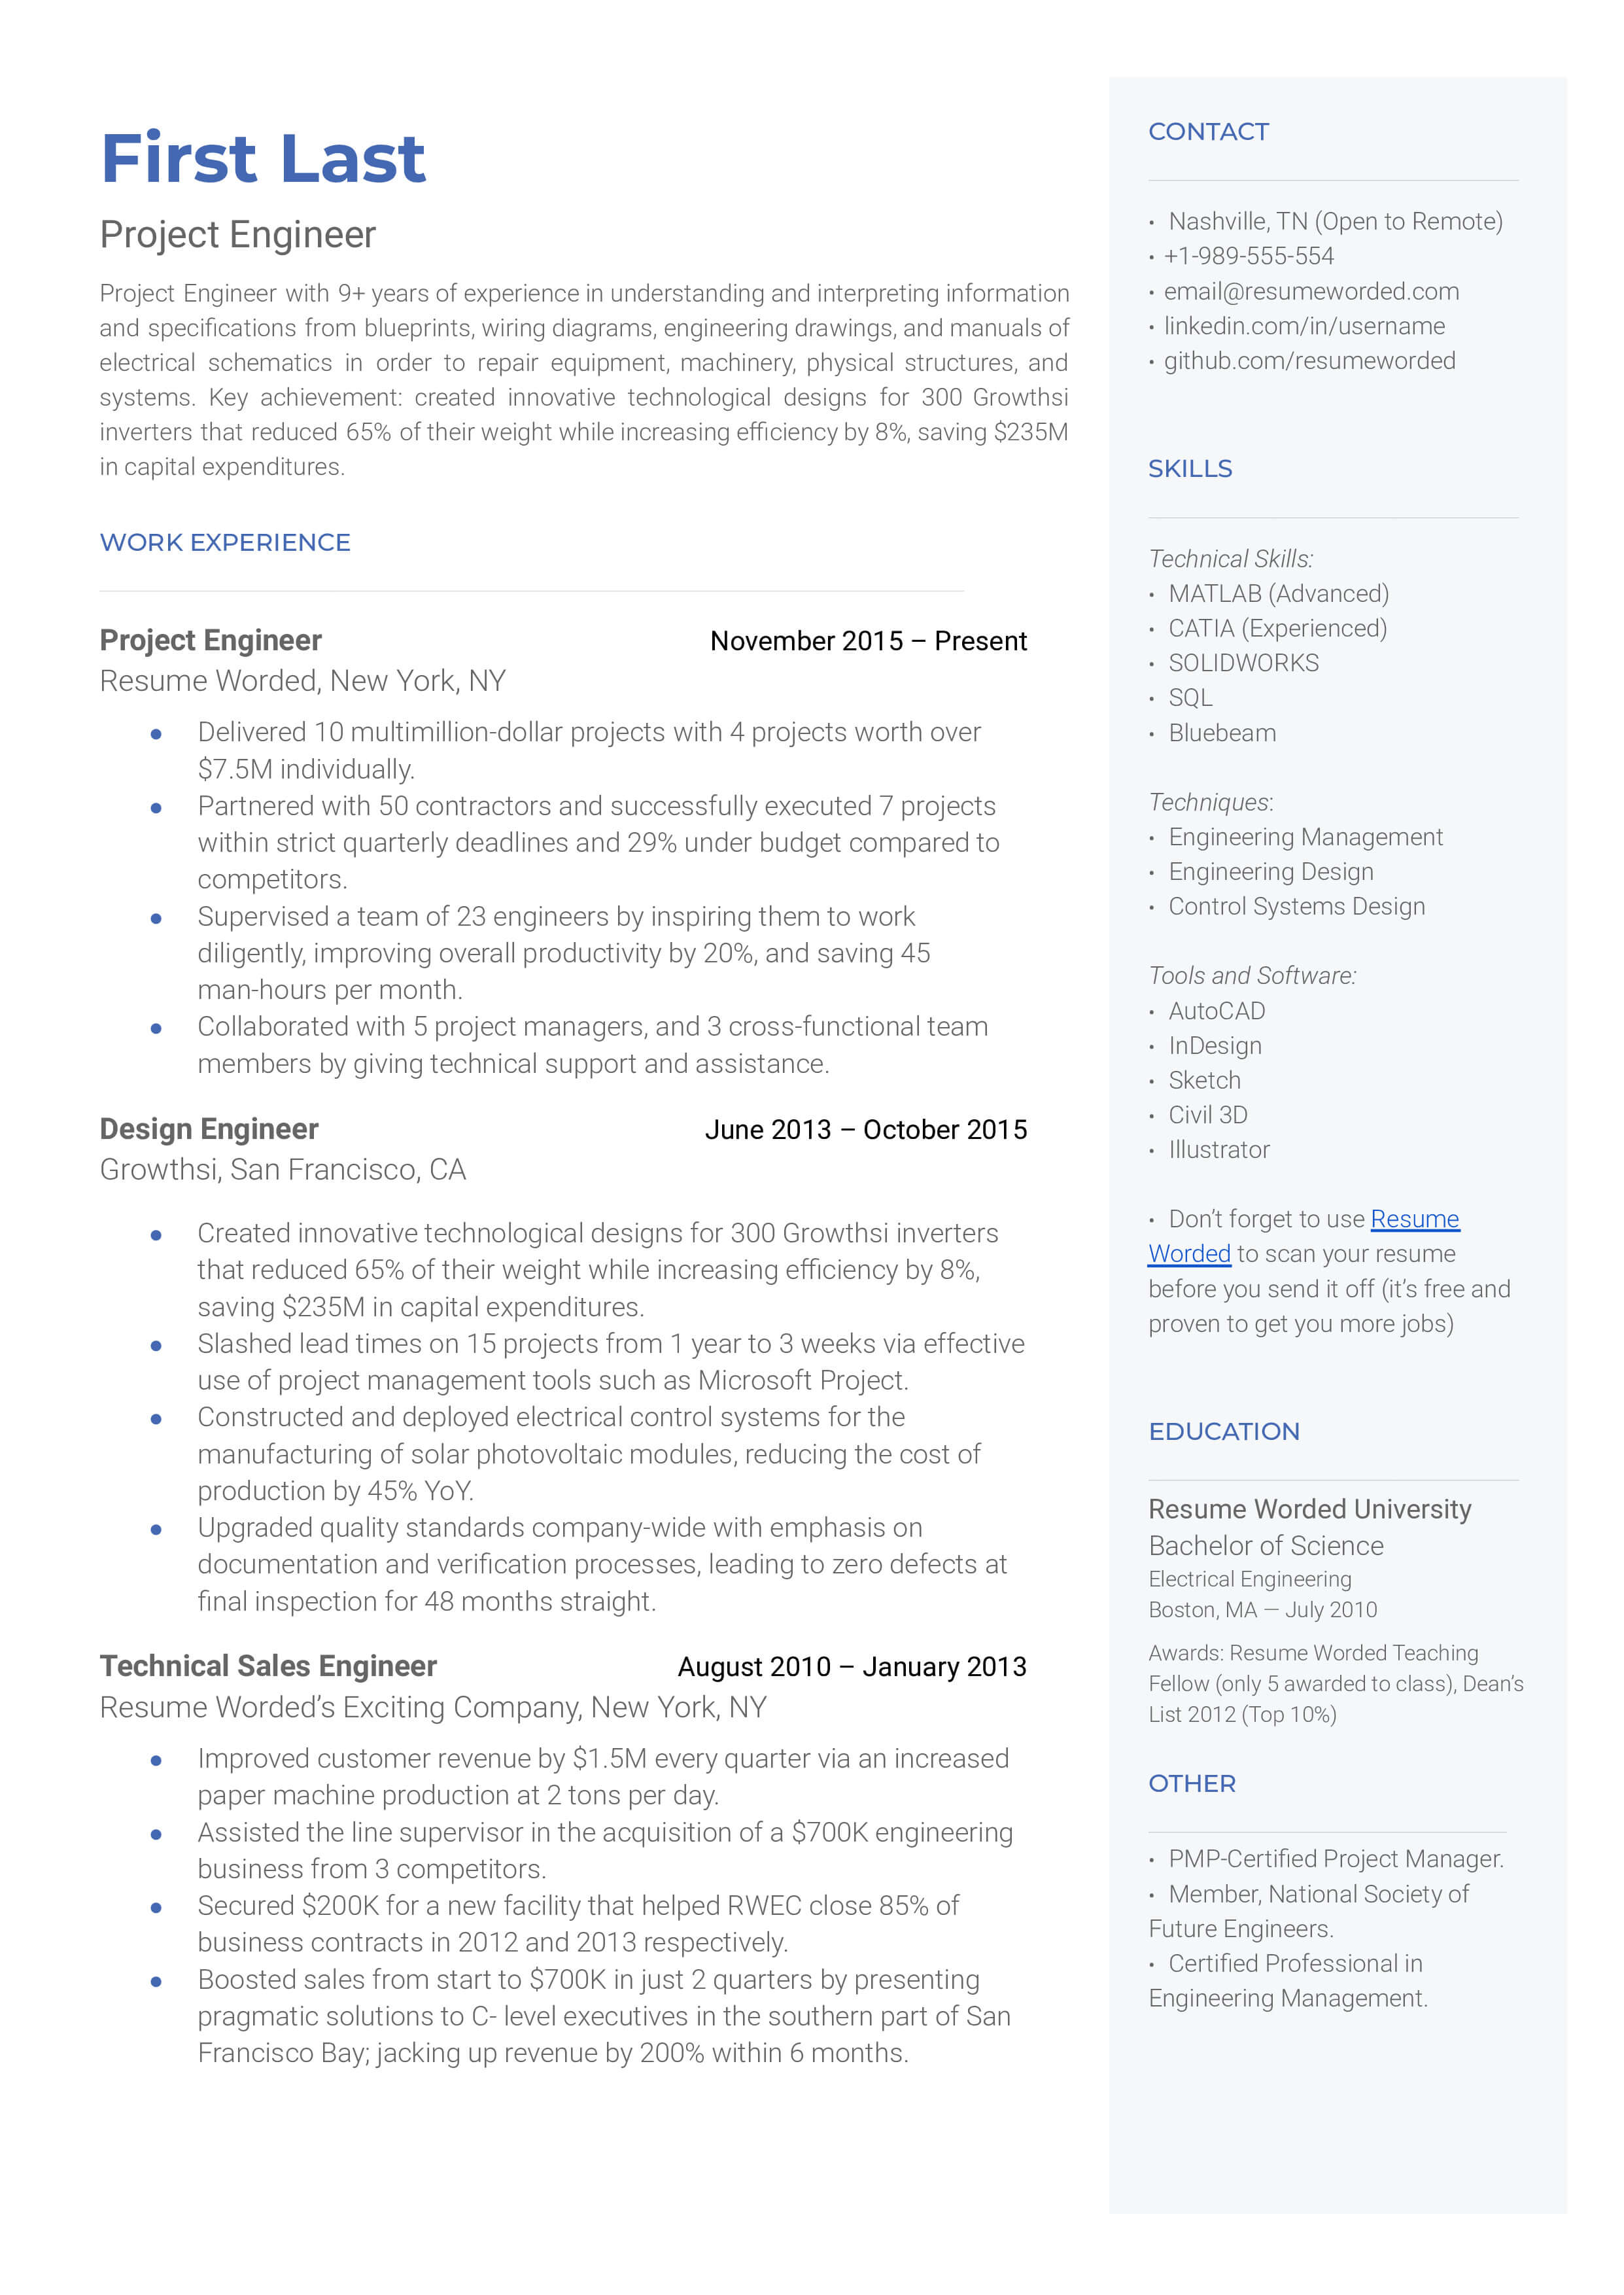 Project engineer resume template